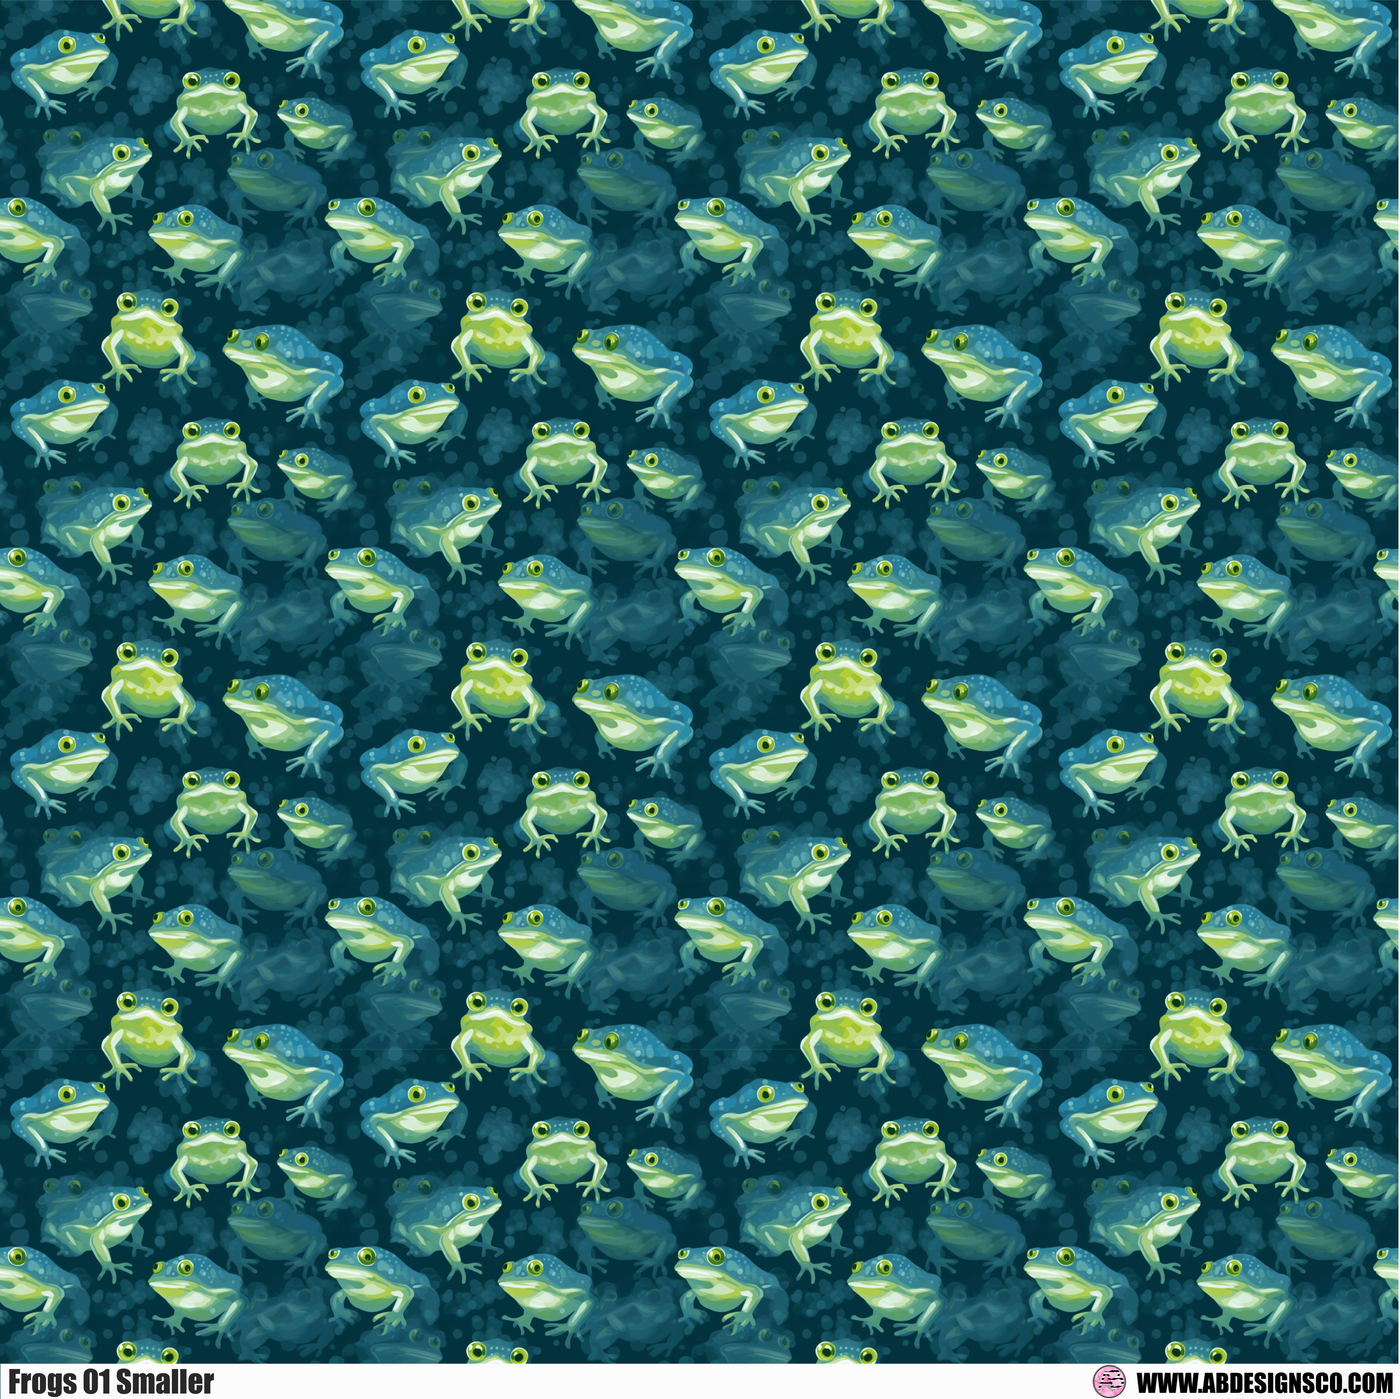 Adhesive Patterned Vinyl - Frog 01 Smaller